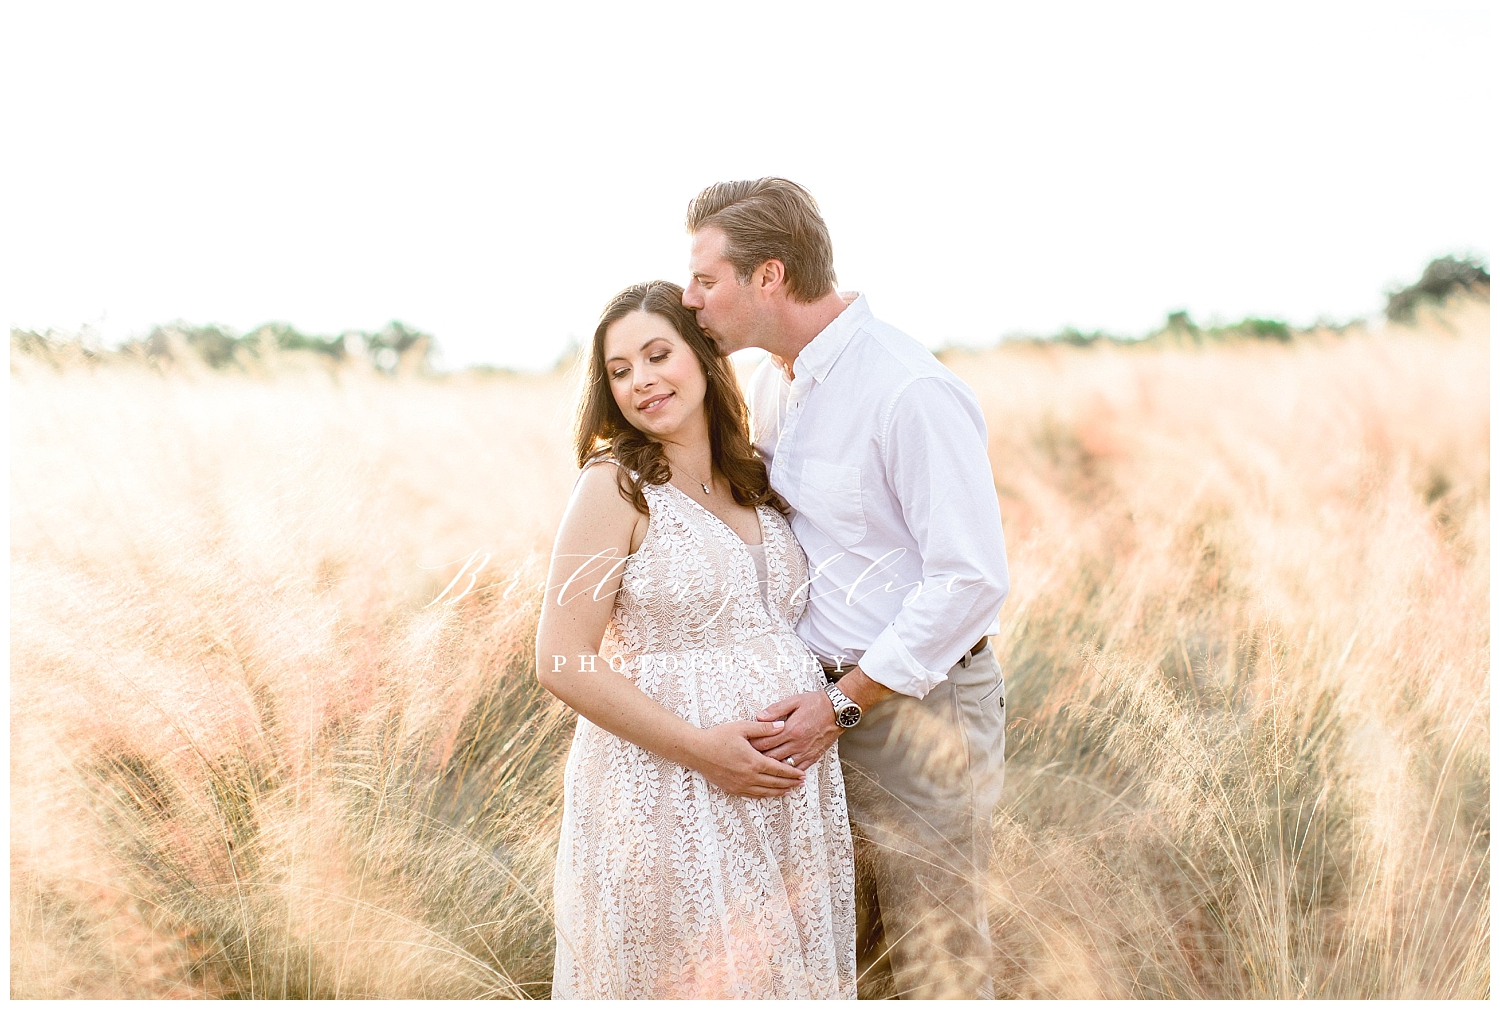 Tampa Family Outdoor Maternity Photographer